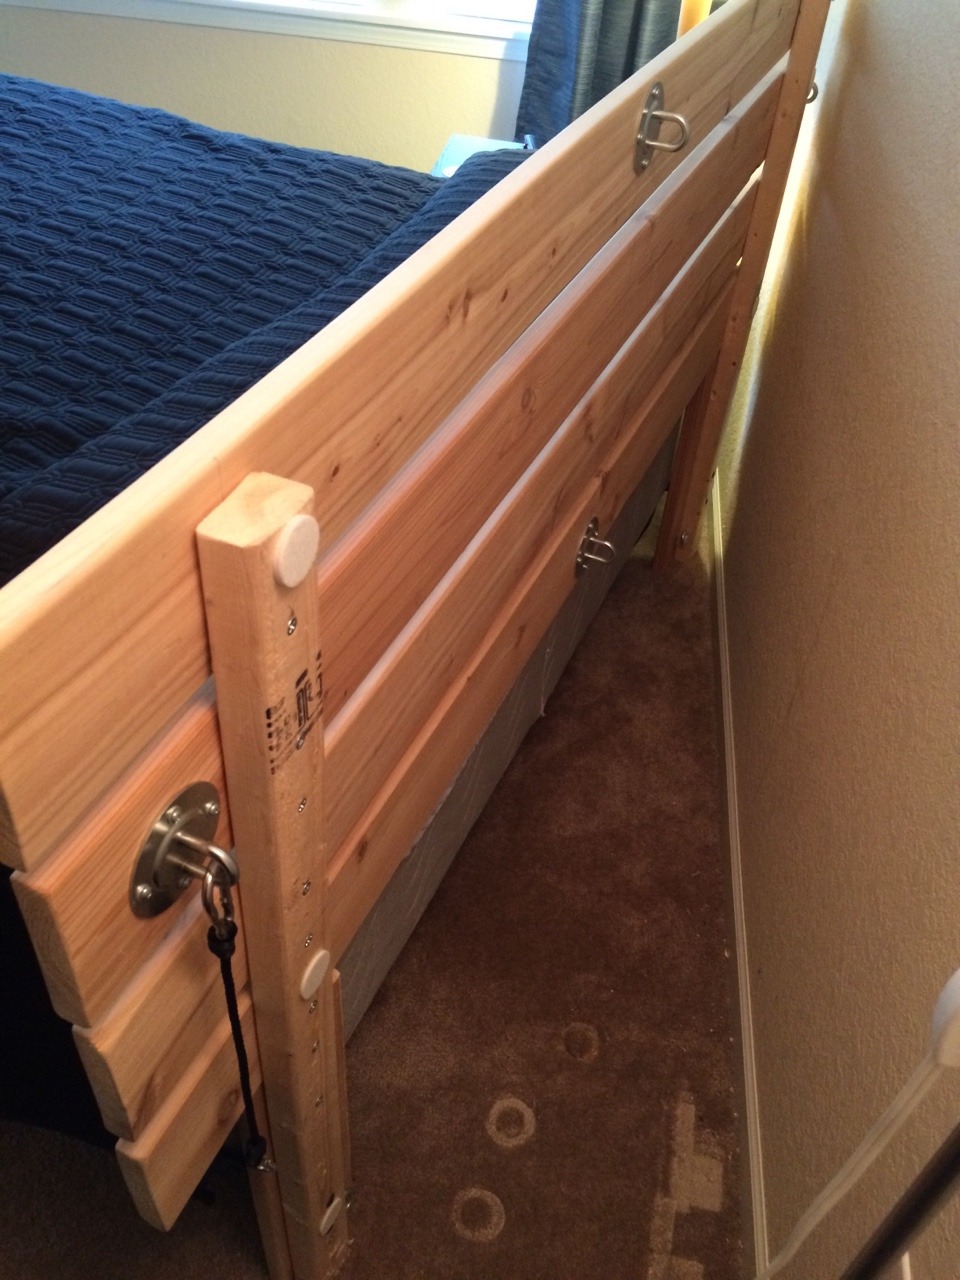 imabreathingghost:  him3-ros:  My headboard….Church up front.  Whorehouse in the